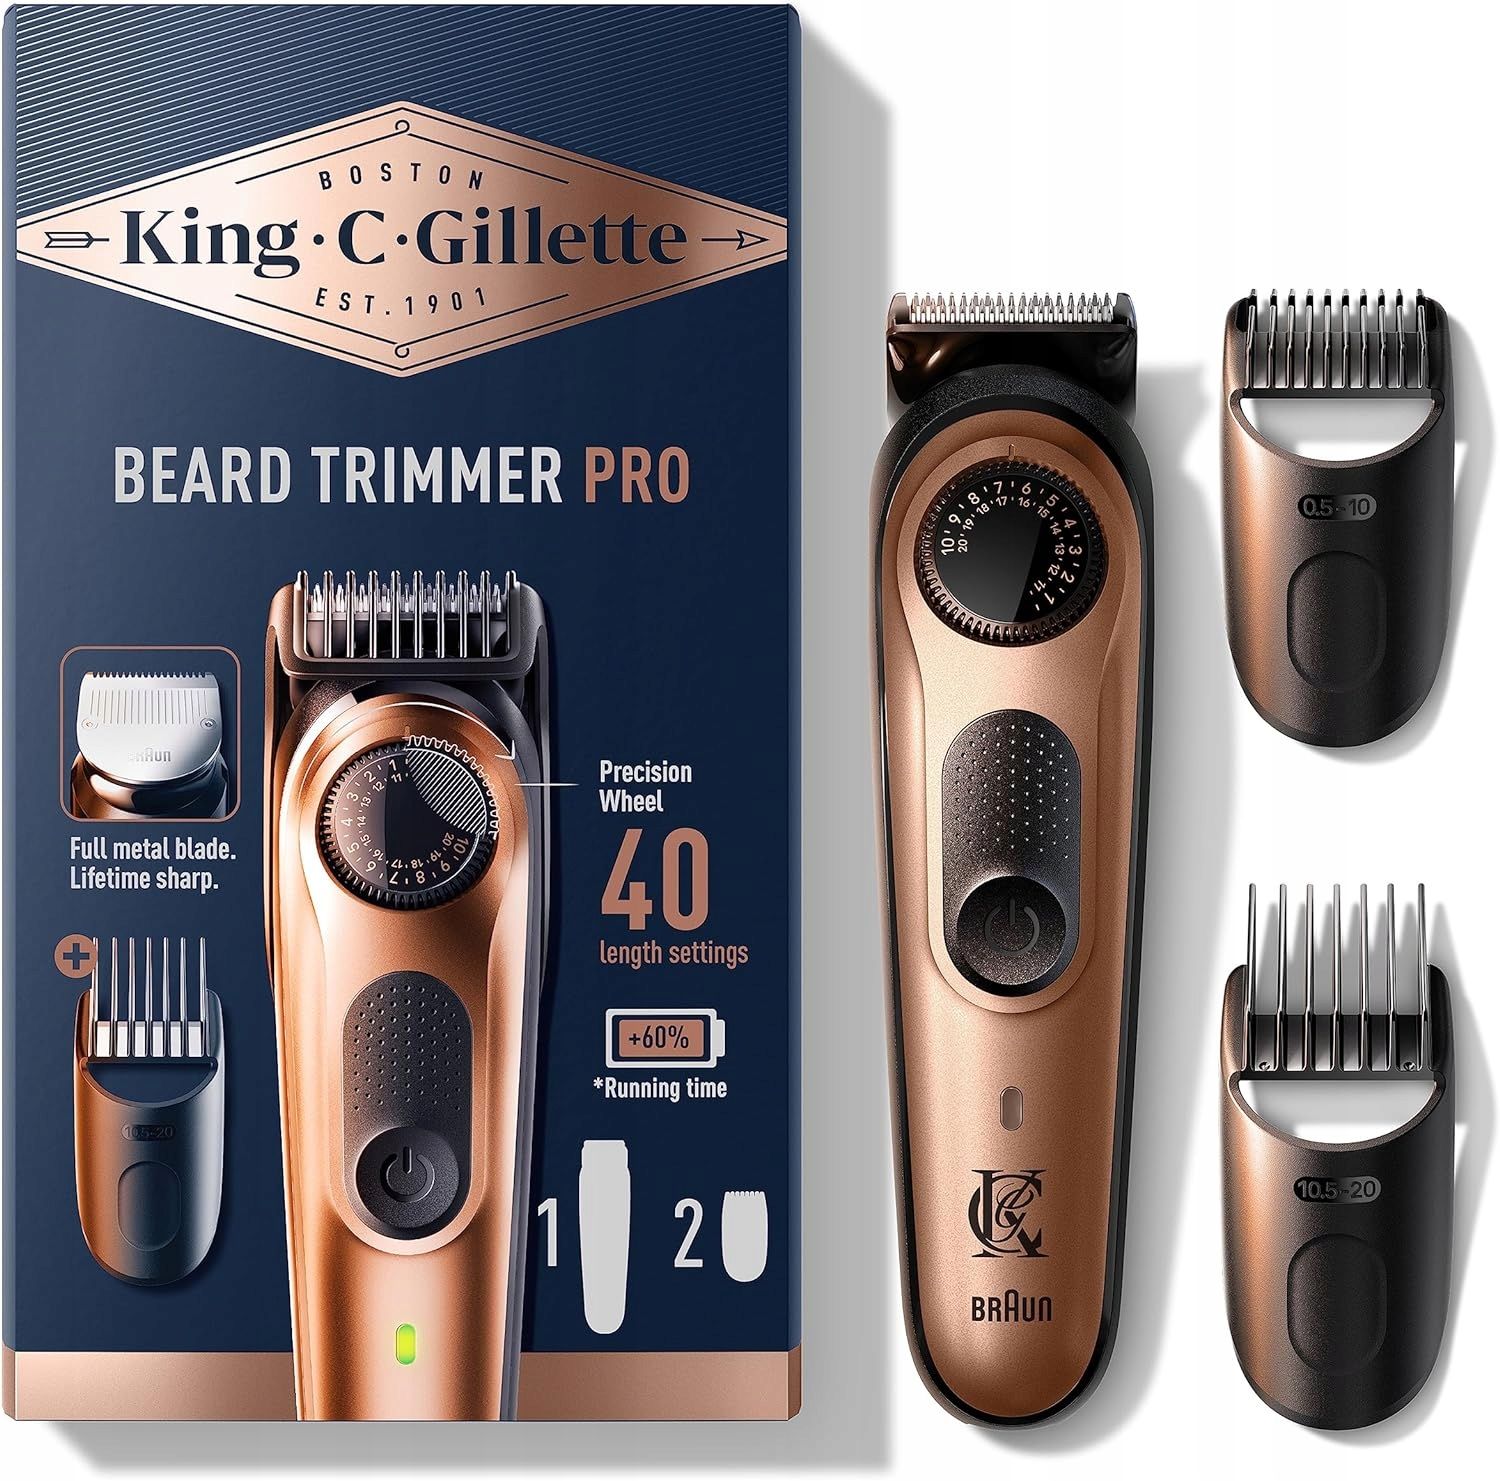 outlet trymer gillette beard trimmer pro 80 minut pracy  opis